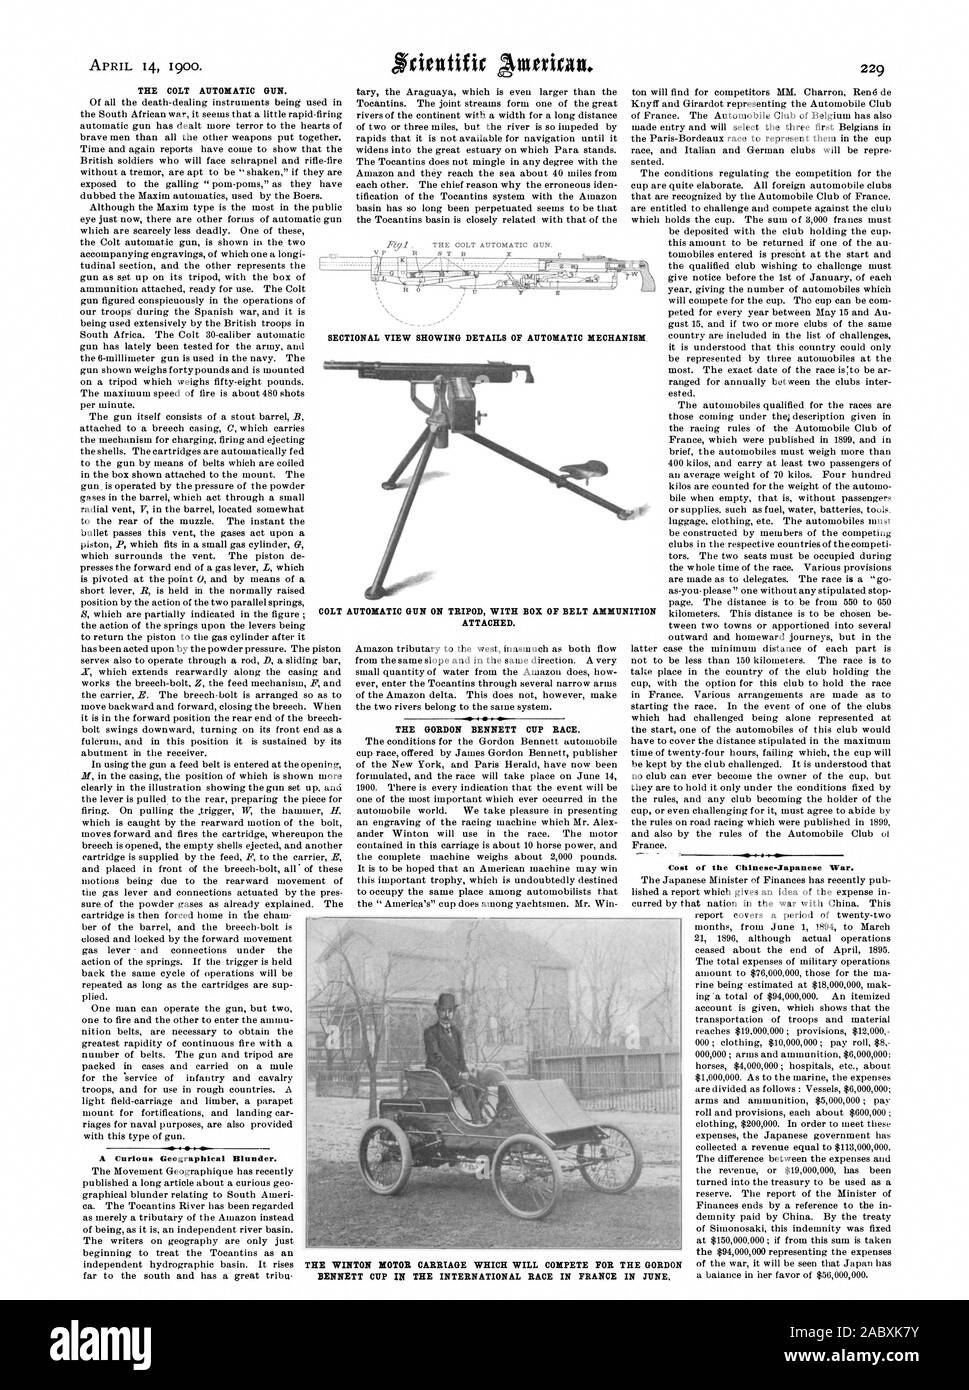 THE COLT AUTOMATIC GUN. TIONAL VIEW SHOWING DETAILS OF AUTOMATIC MECHANISM THE GORDON BENNETT CUP RACE. SEC mibmilegratm====fipik agu. AUTOMATIC GUN ON TRIPOD WITH BOX OF BELT AMMUNITION ATTACHED. APRIL 14 1900. A Curious Geographical Blunder. THE WINTON MOTOR CARRIAGE WHICH WILL COMPETE FOR THE GORDON, scientific american, 1900-04-14 Stock Photo